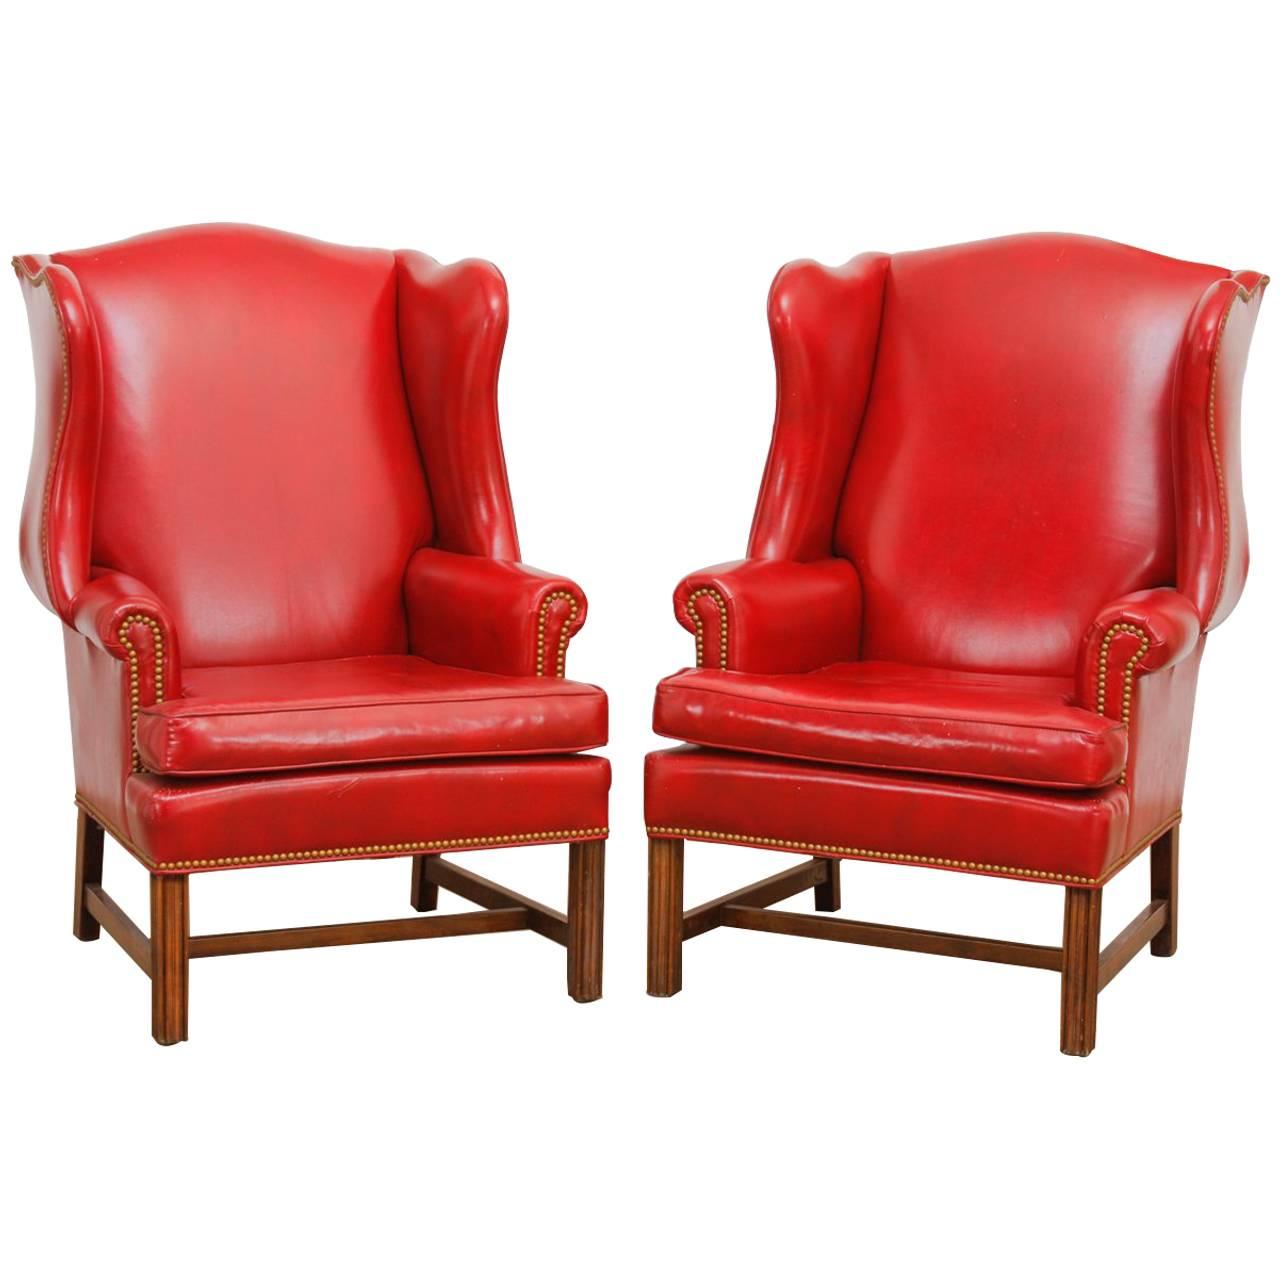 Pair of Georgian Style Red Leather Wingback Library Chairs